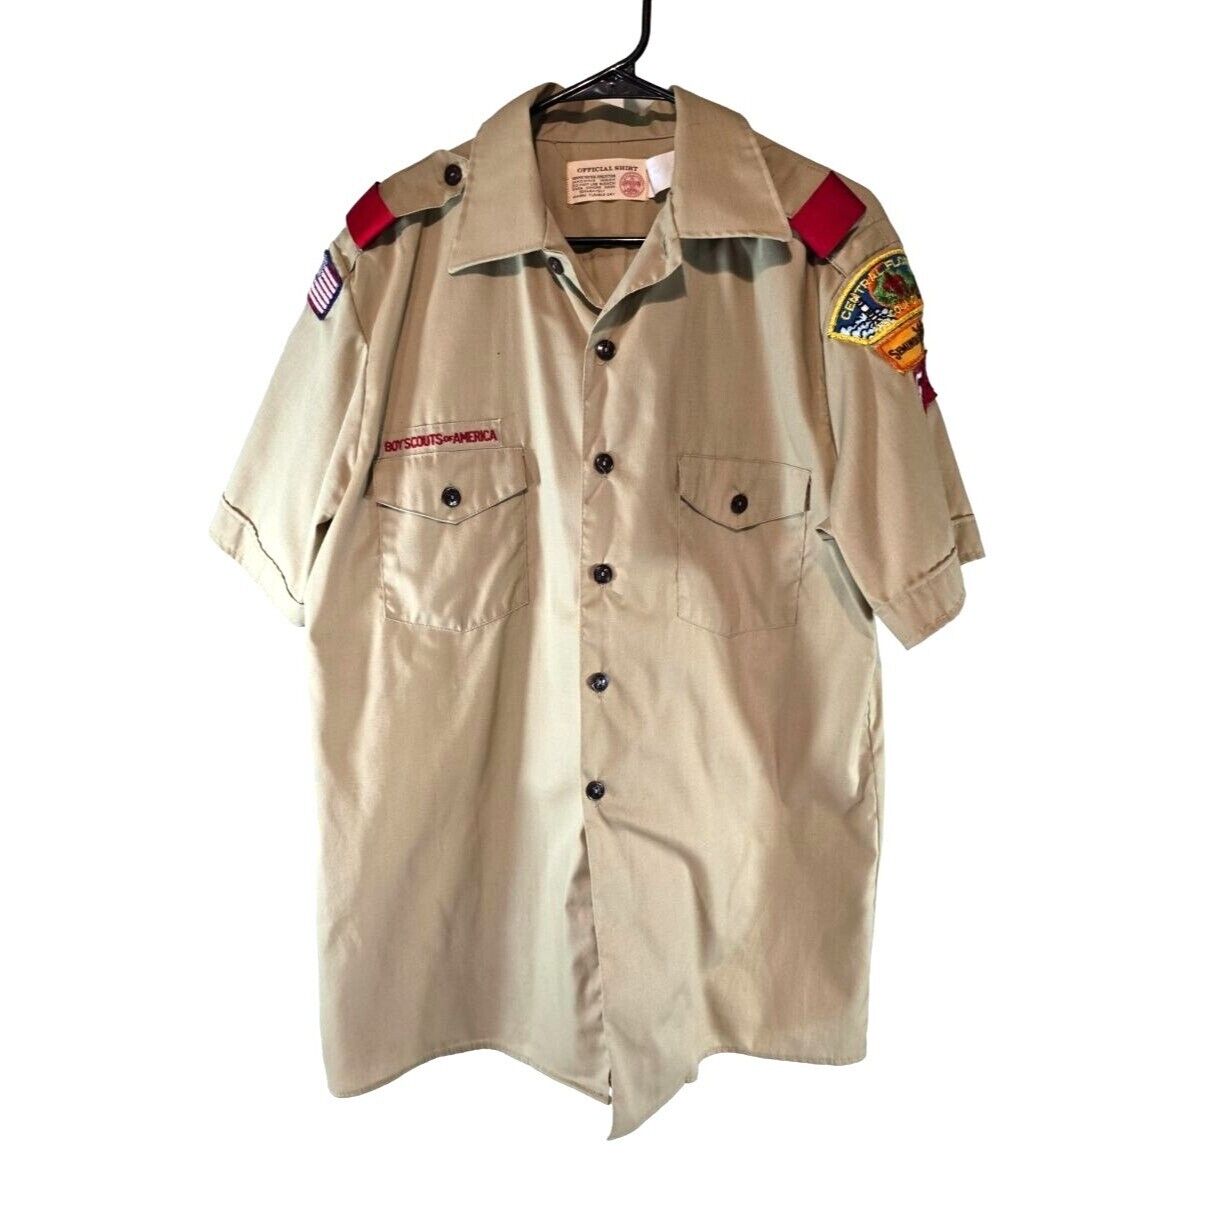 Boy Scouts of America Vintage Shirt Top Chest 45\